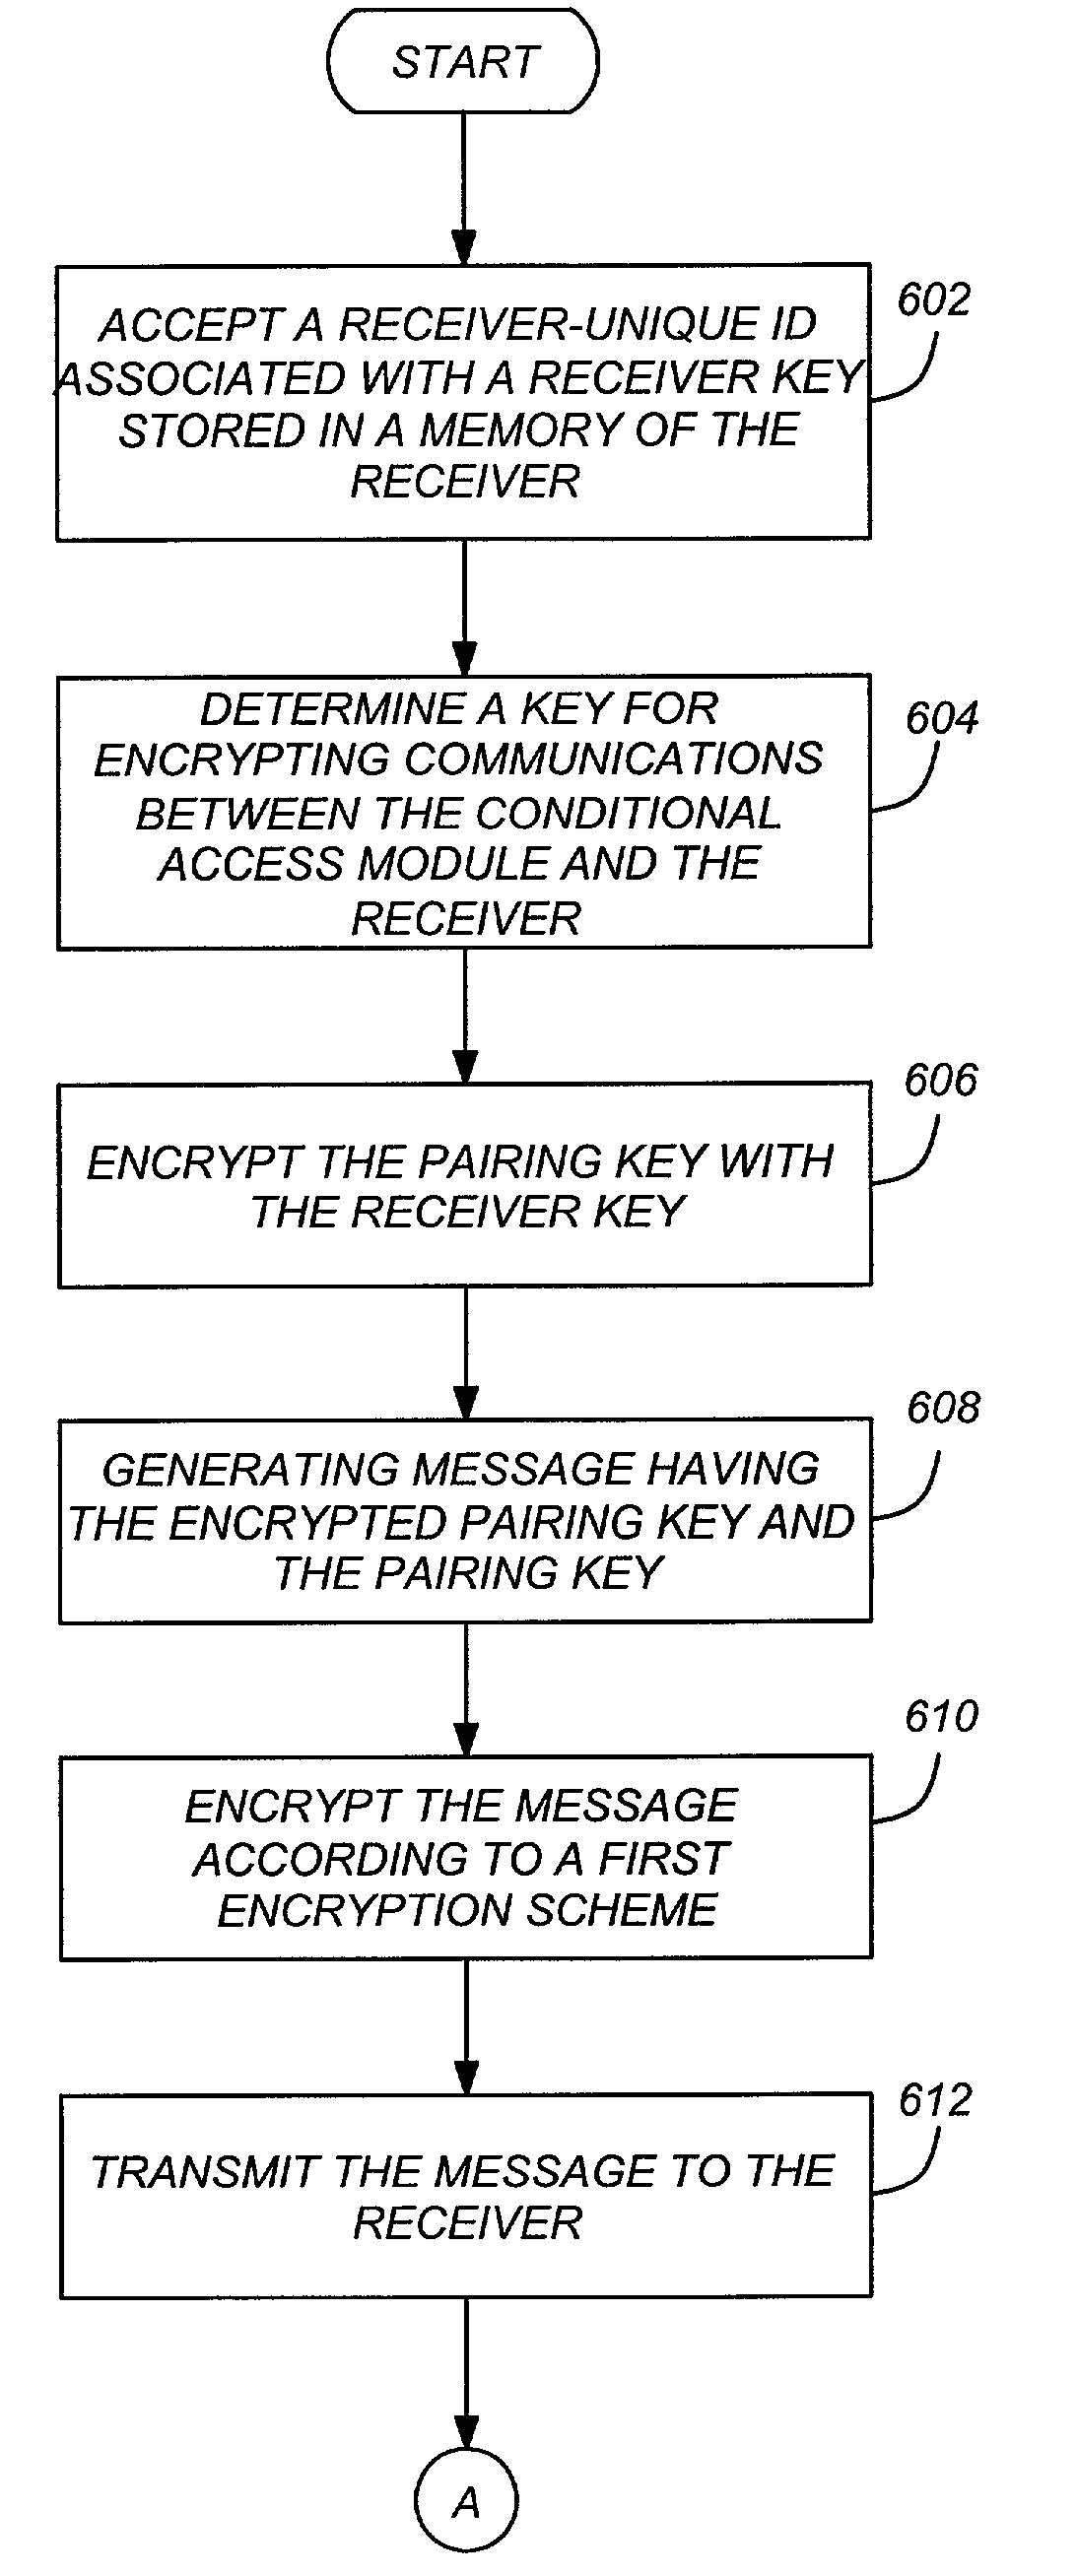 Method and apparatus for encrypting media programs for later purchase and viewing